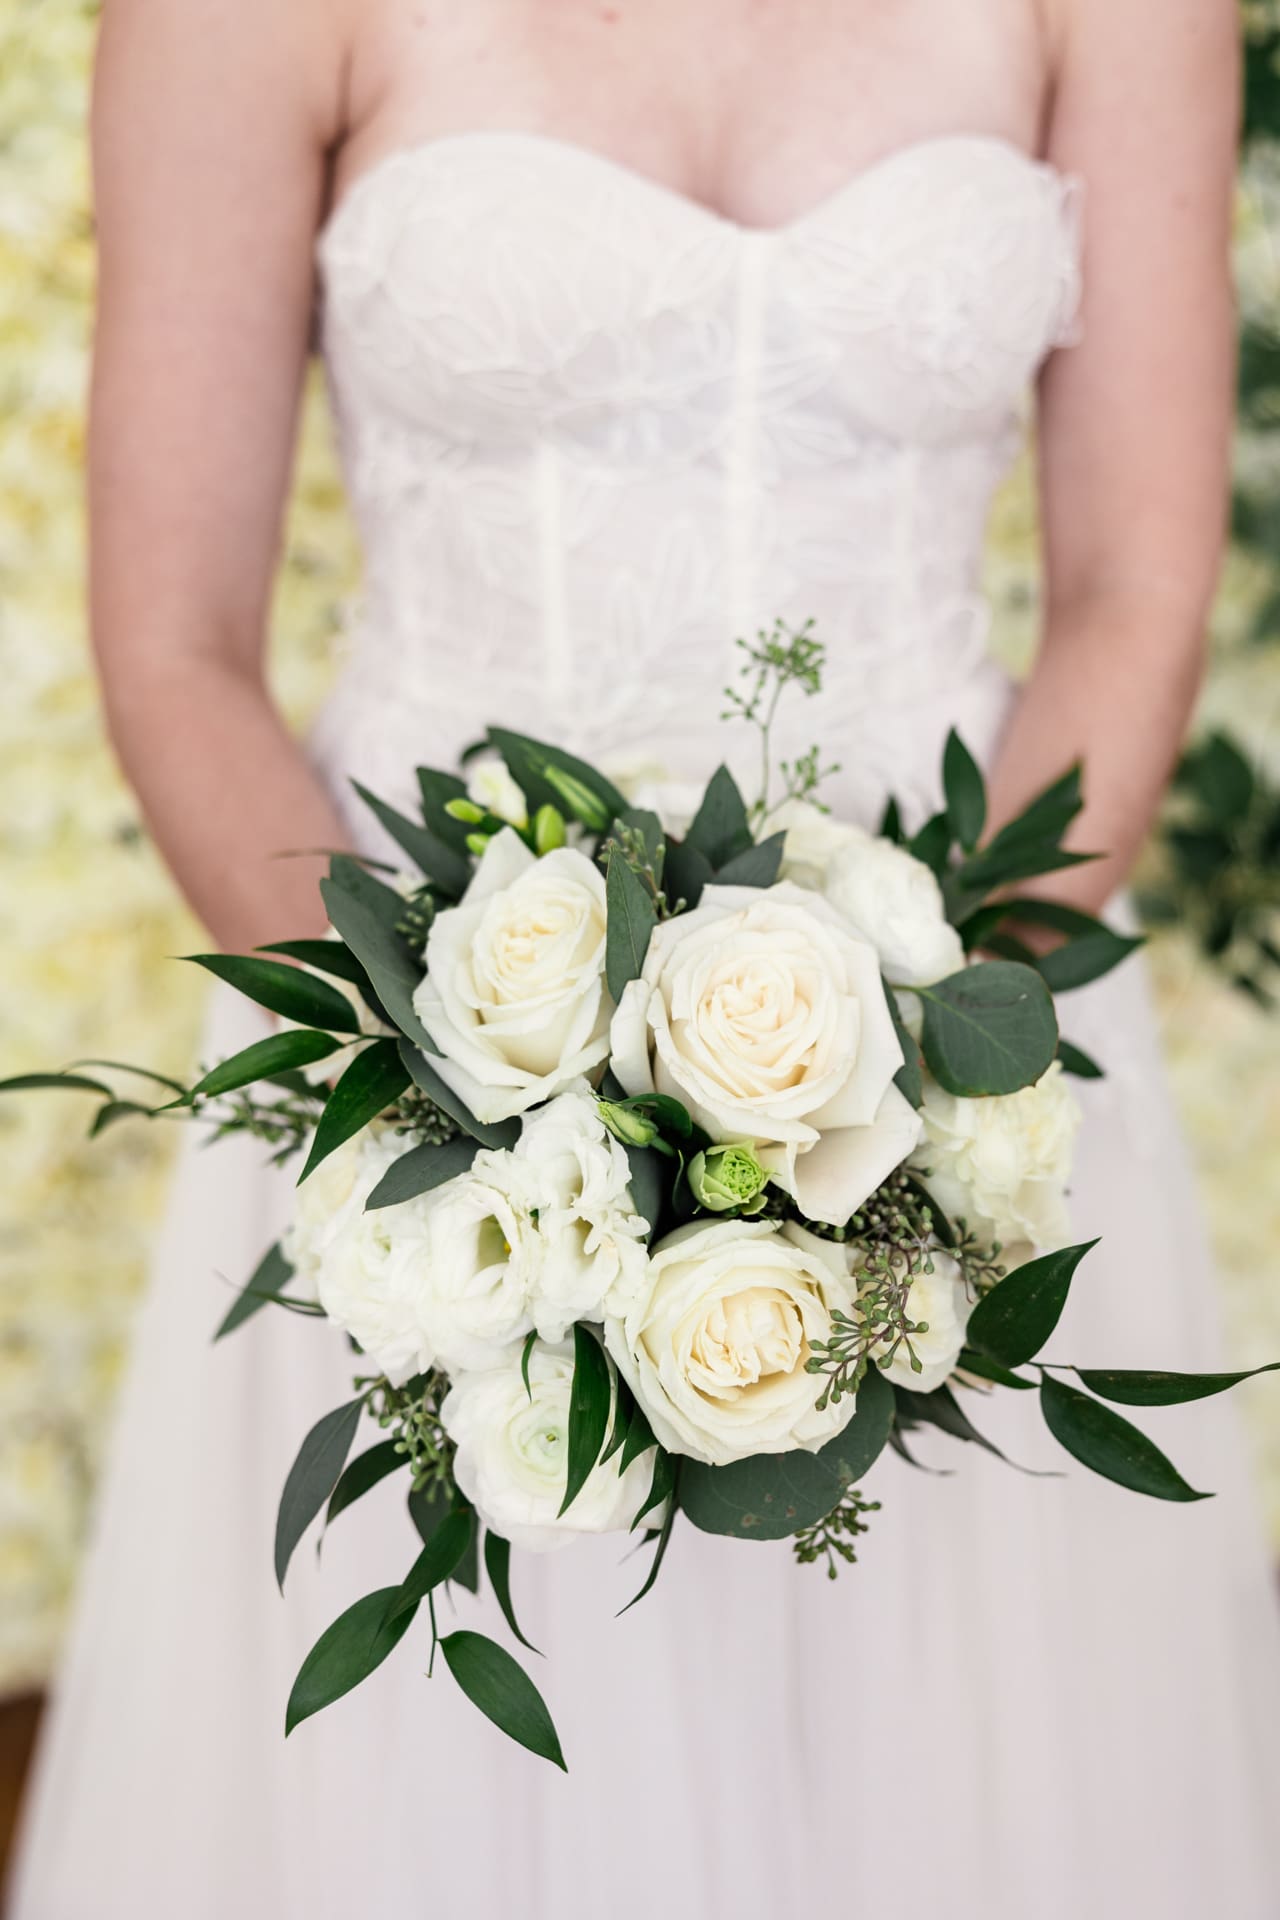 Detail photo of white floral bouquet and greenery in bride's hands at Chicago photography studio P&M Studio